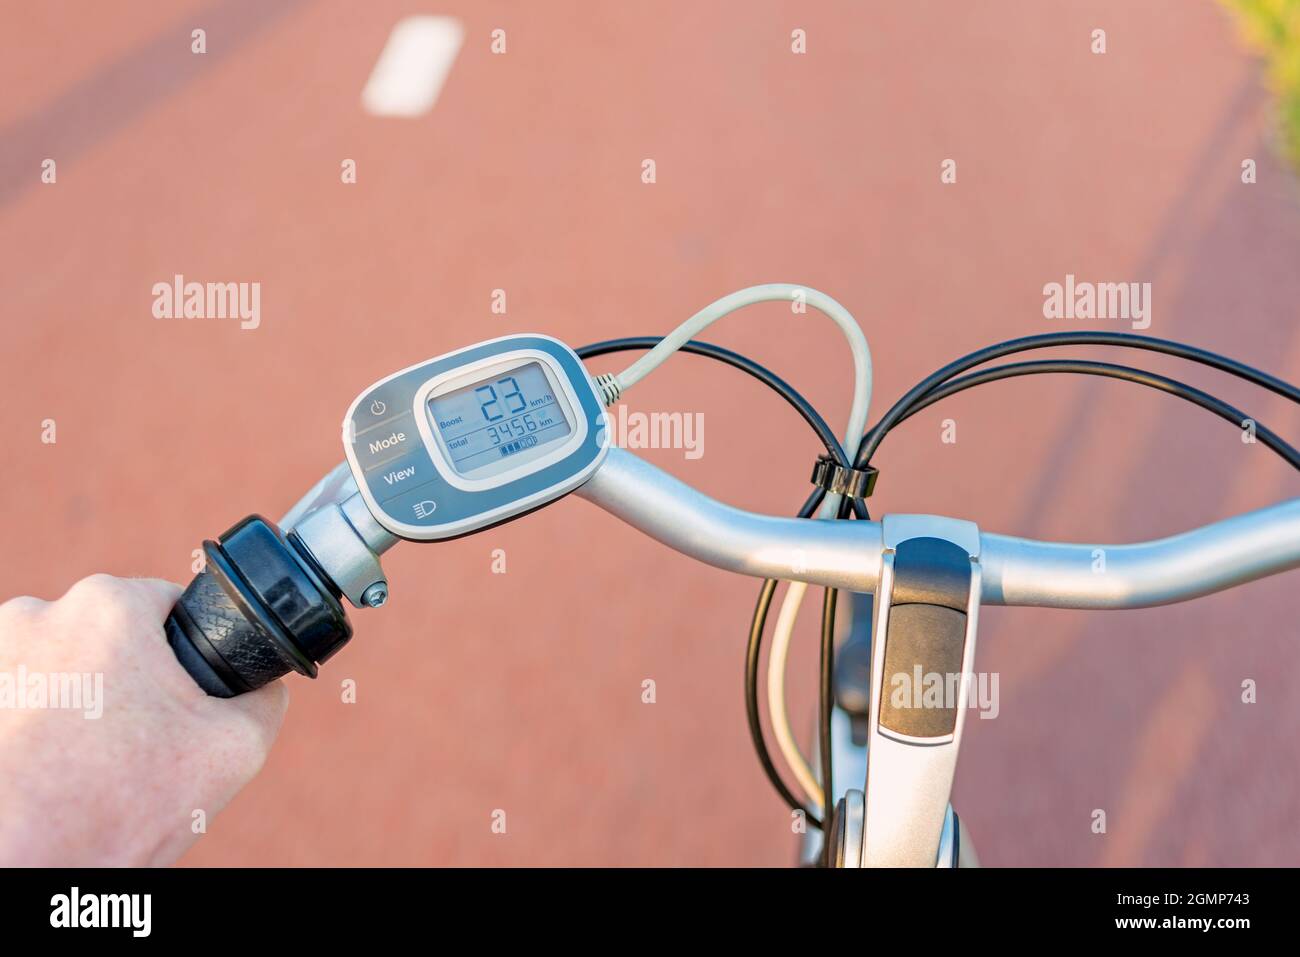 First person perspective on Control Panel on Handlebar of Electric Bicycle while driving on Bicycle lane Stock Photo